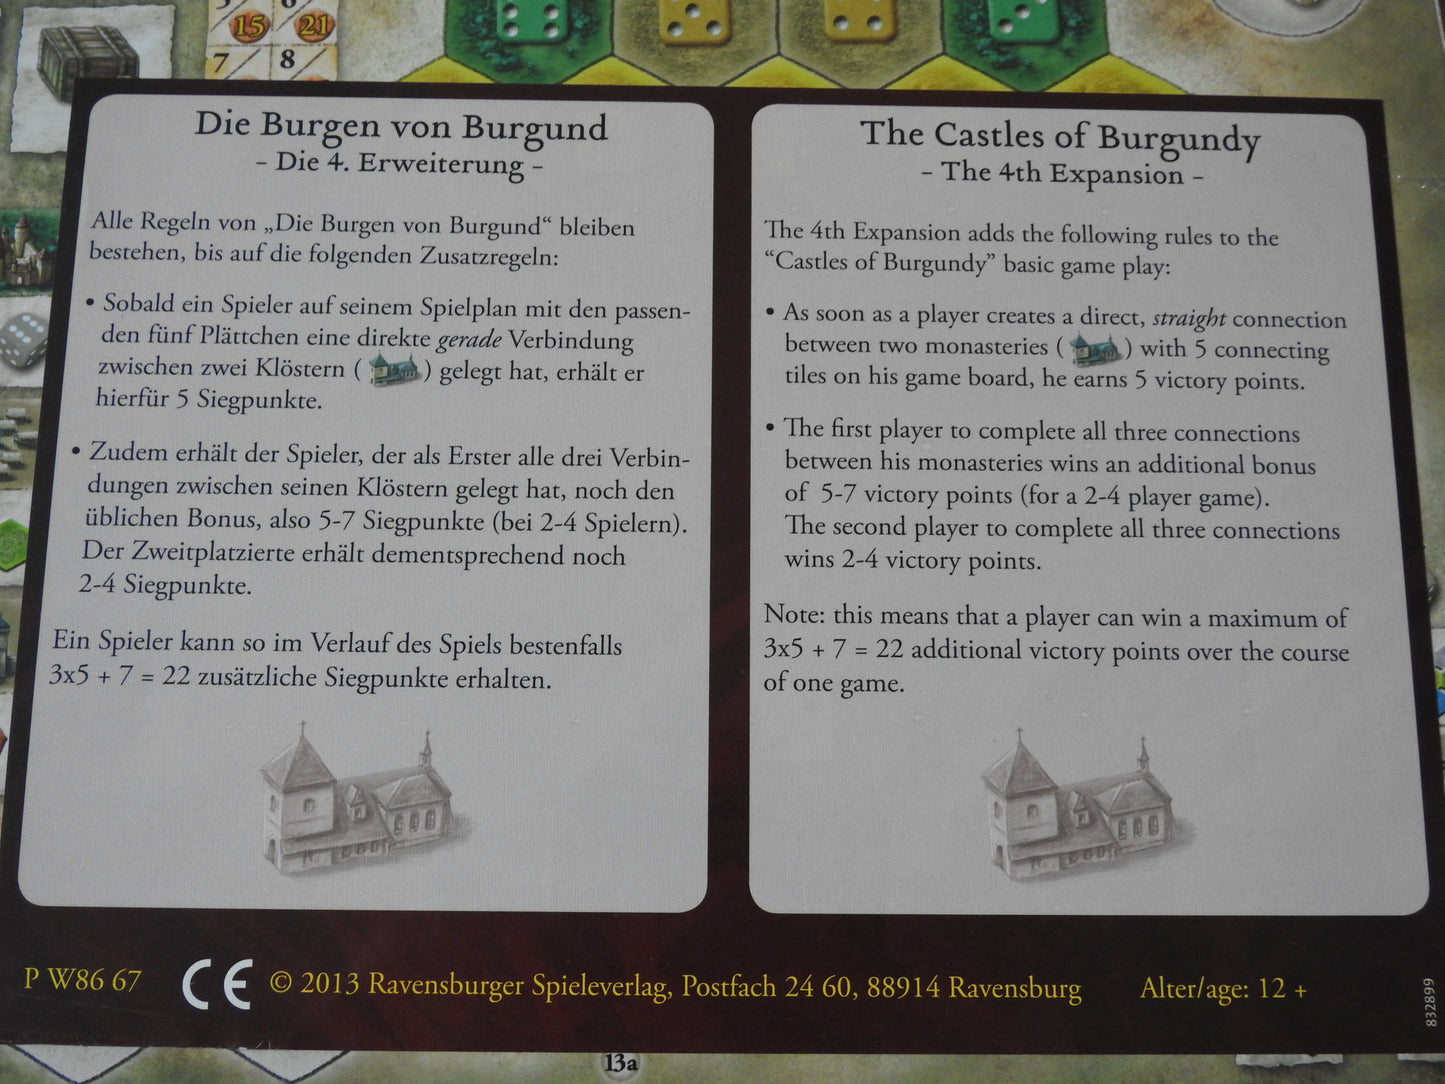 A closer view of the rule sheet that comes with this expansion.